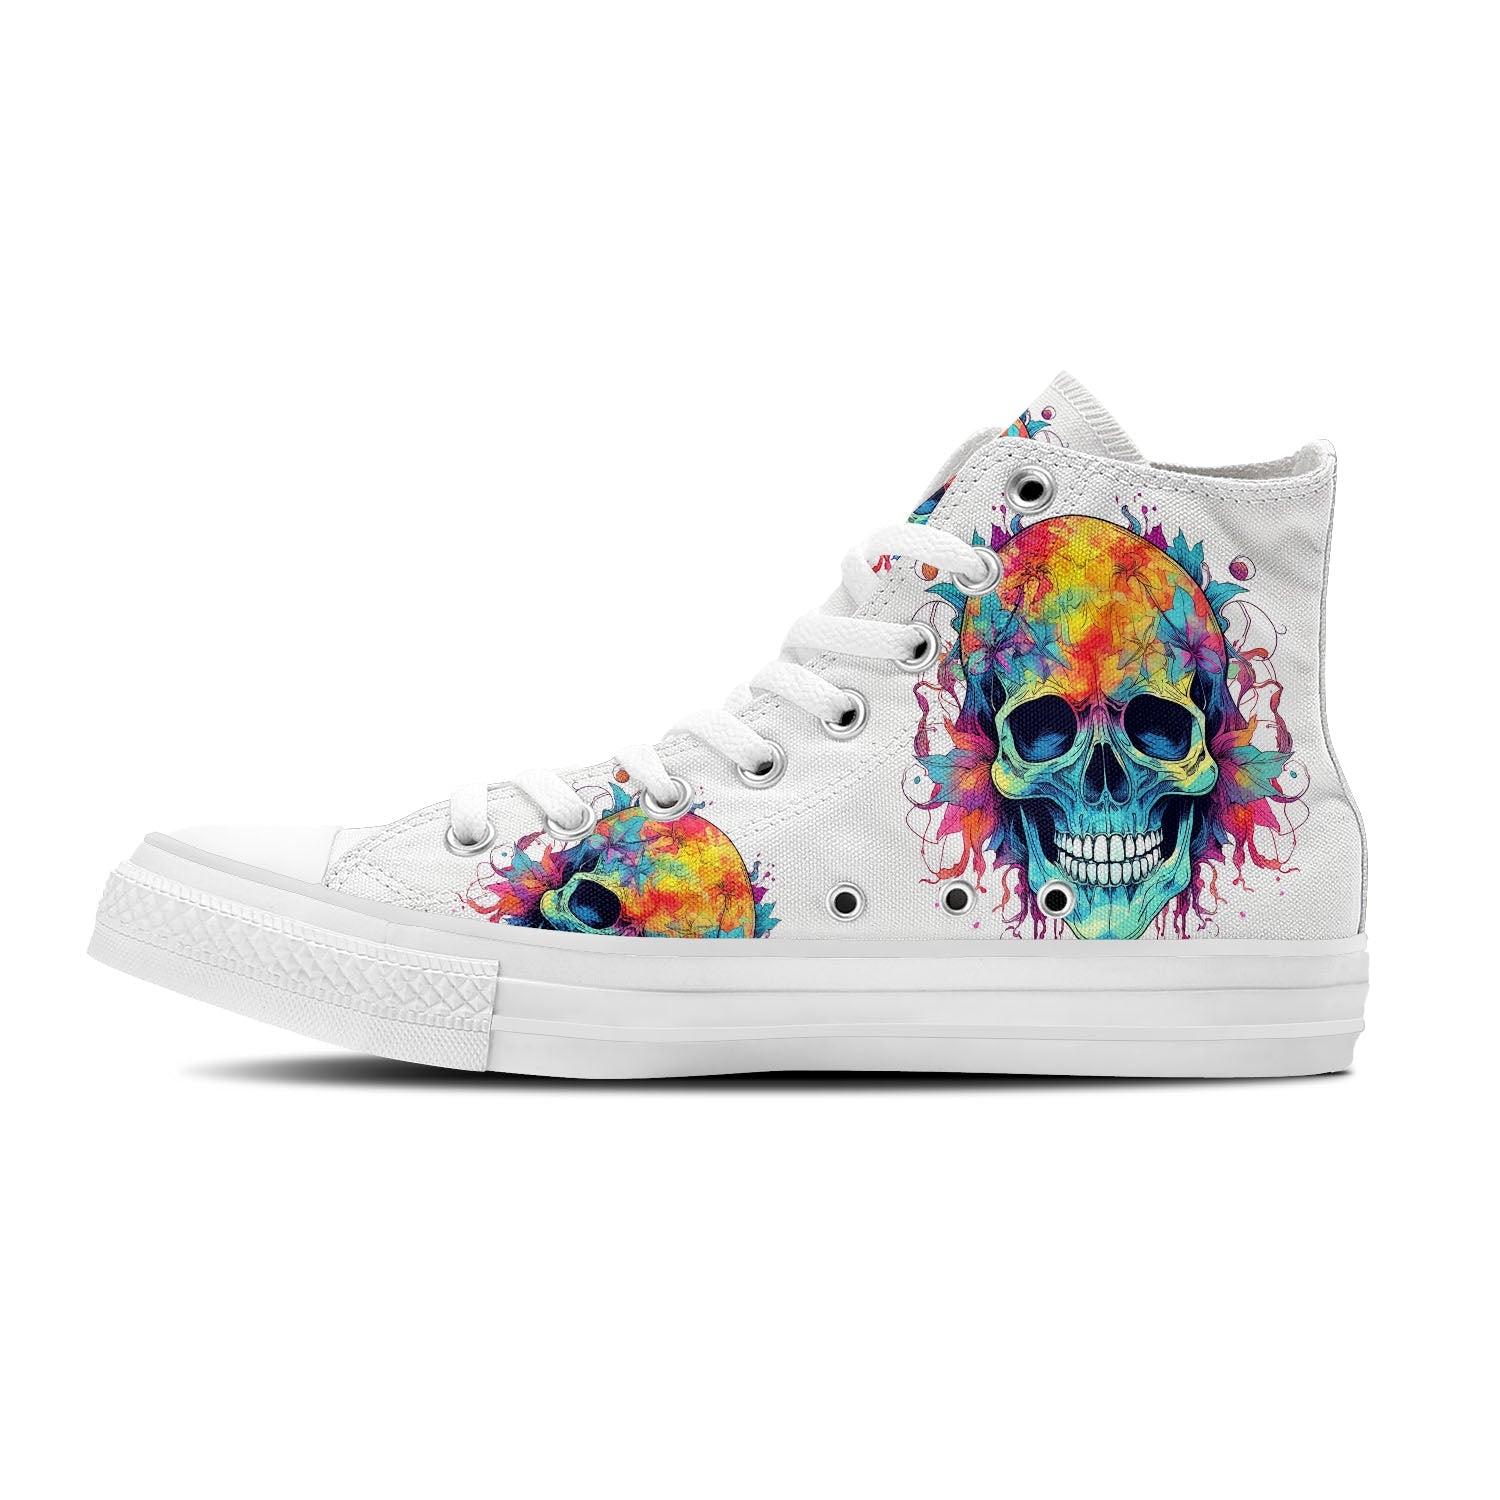 Pencil Perfection: Elevate Your Style with Central-High Canvas Shoes - Unisex Fashion featuring Skull Prints in a Captivating Array of Color and Pencil-inspired Detailing